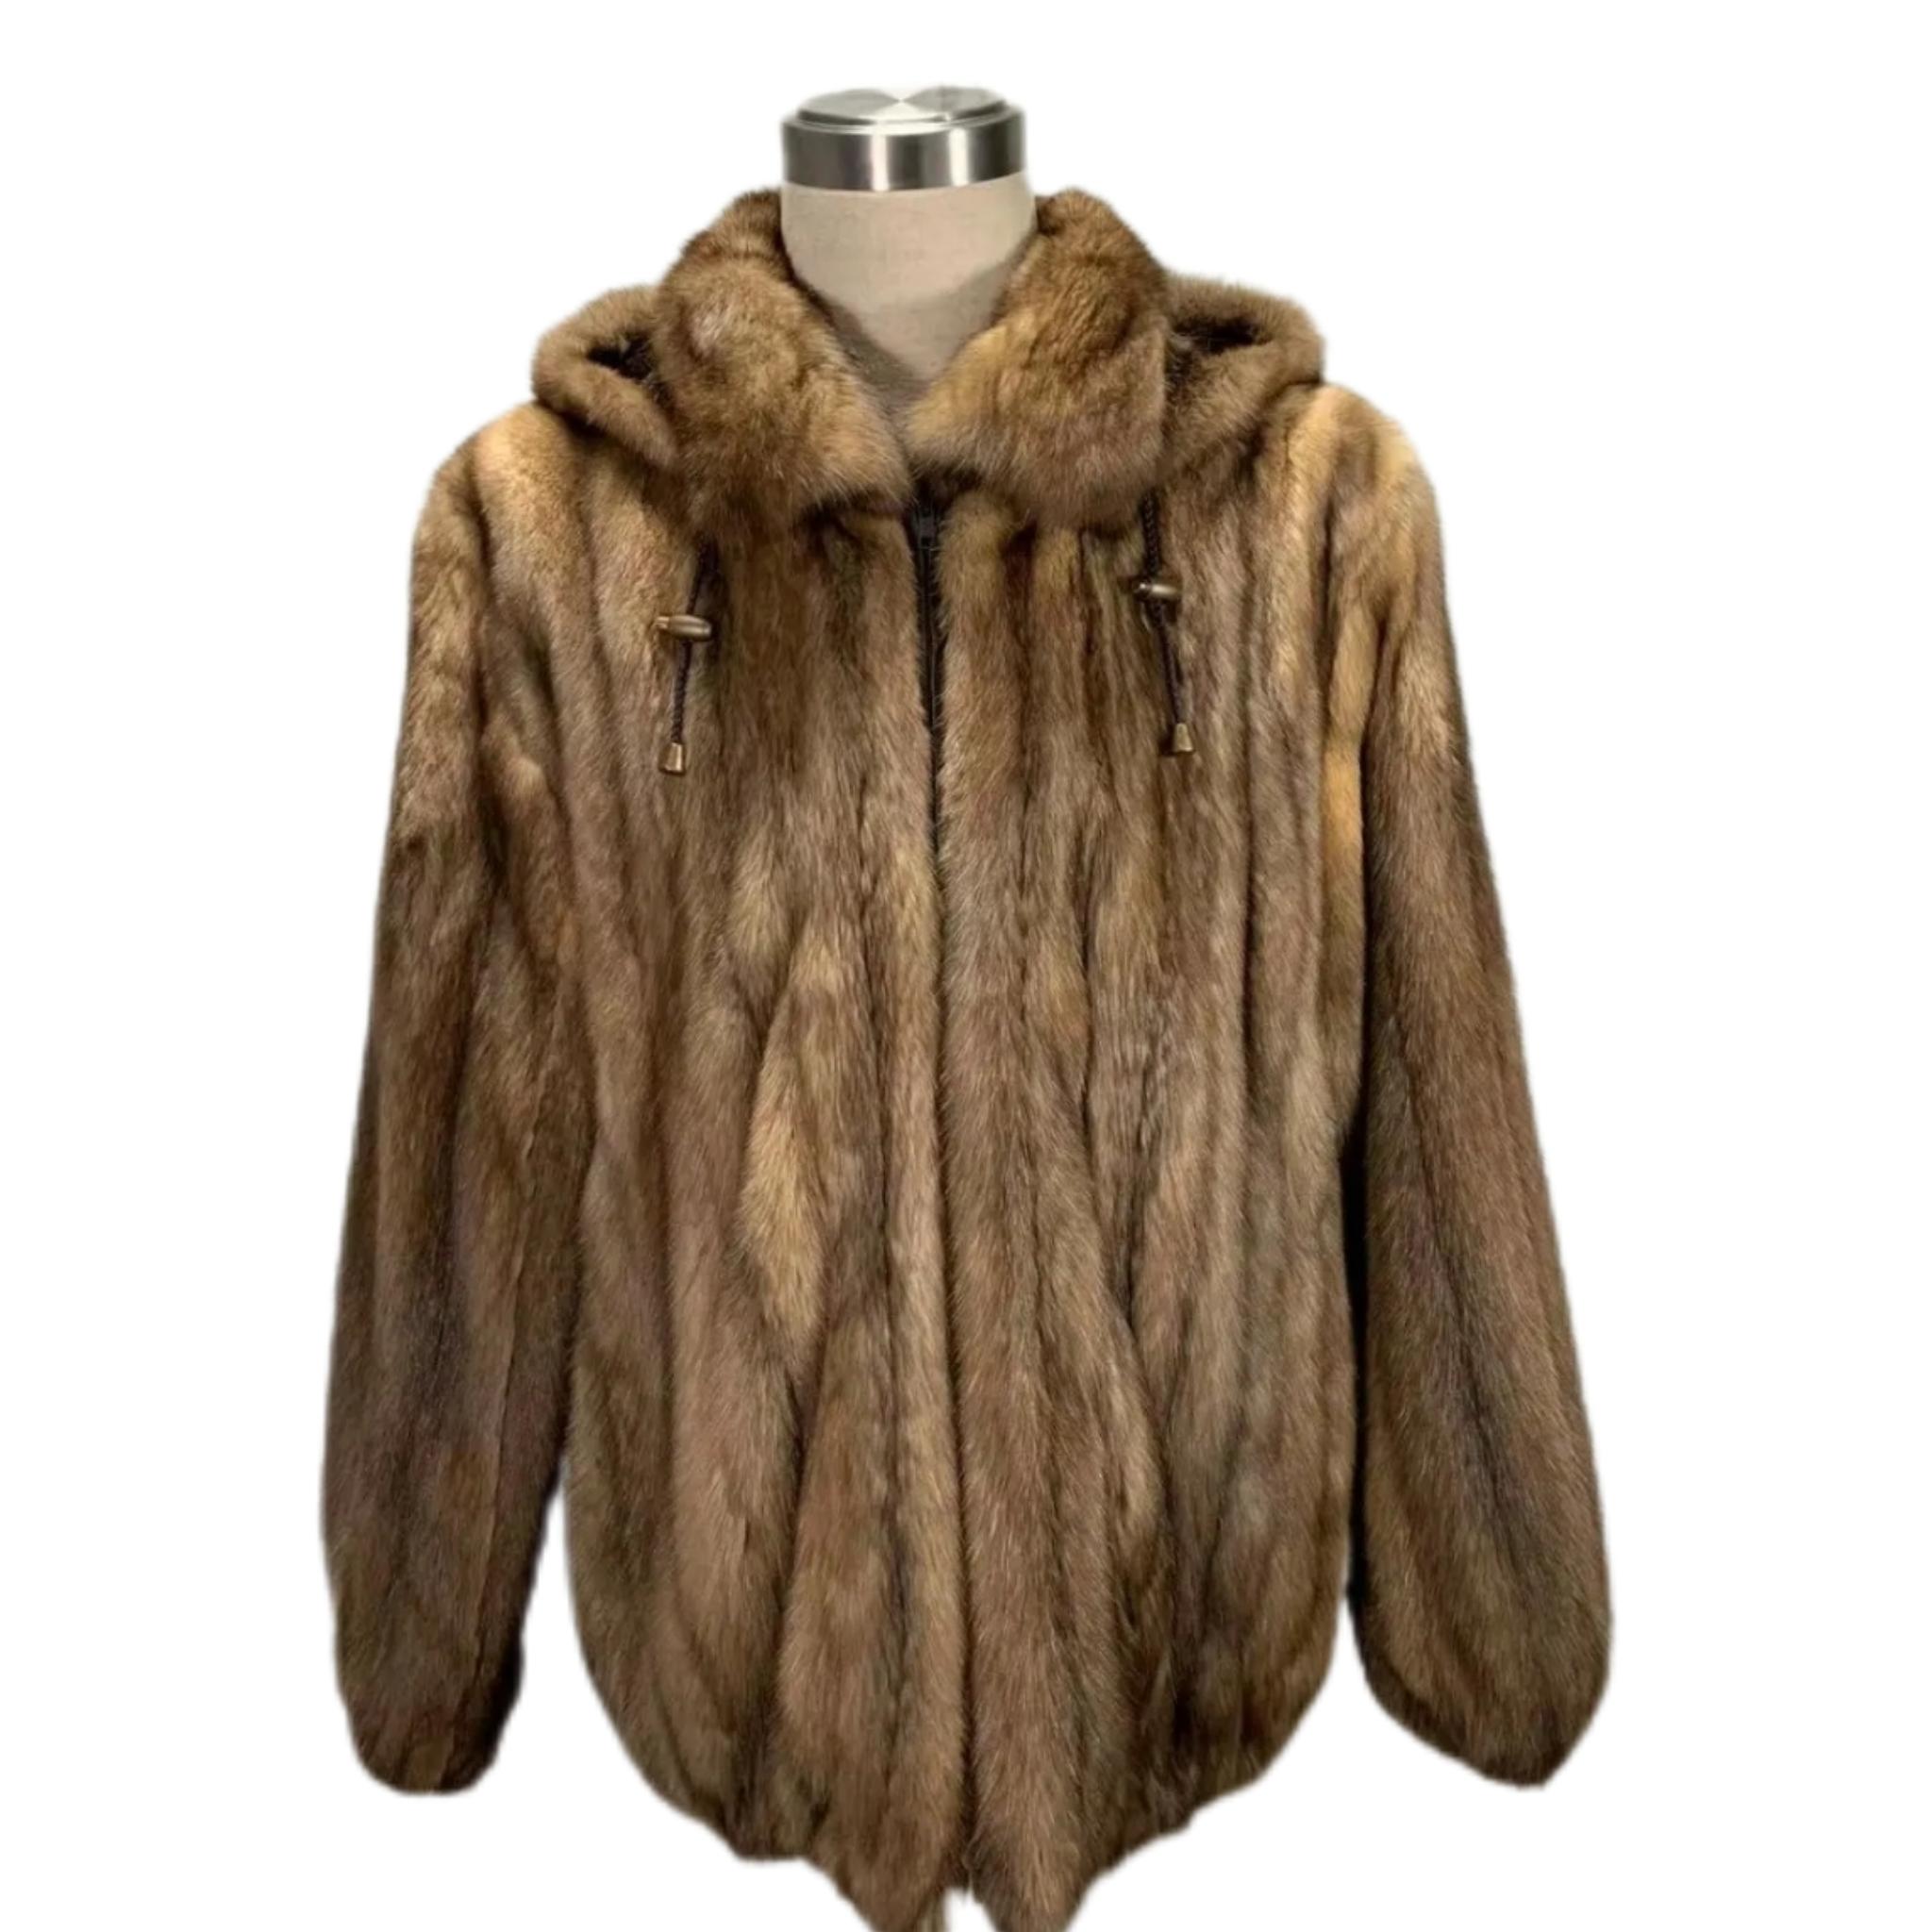 PRODUCT DESCRIPTION:

Brand new Big Tall men's Russian Sable fur coat bomber jacket size 2 XL
**** exclusive Italian dressed skins 

Condition: Brand New

Closure: Zipper

Color: Tortora

Material: exclusive Russian sable 

Garment type: